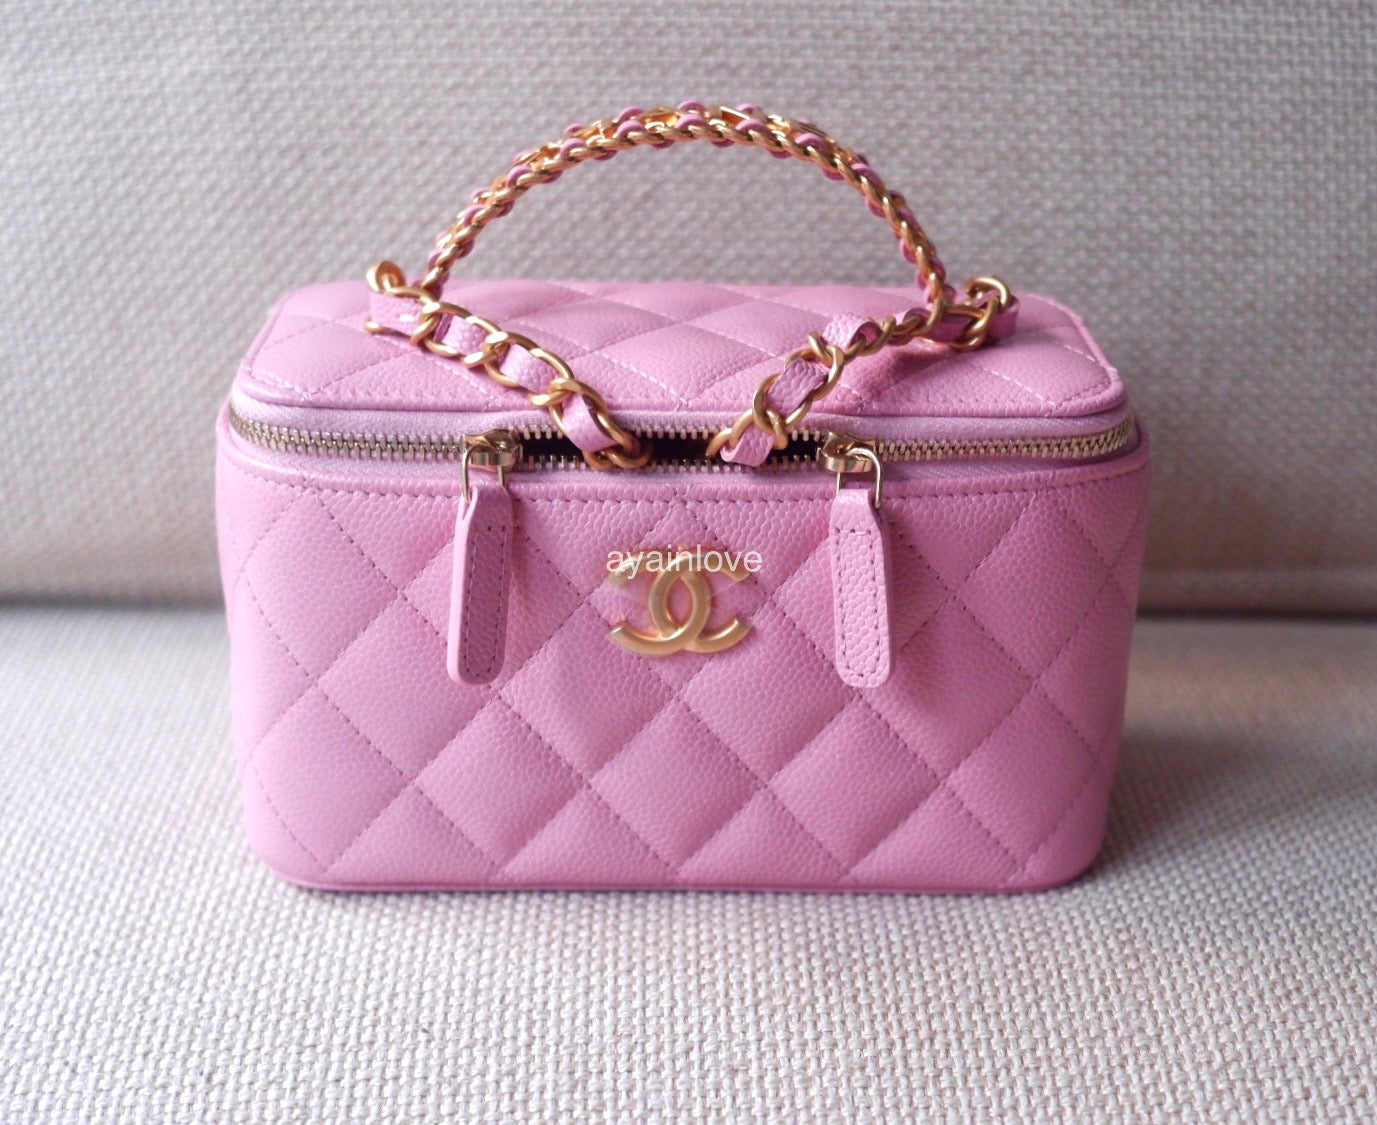 CHANEL 22S Pick Me Up Pink Caviar Top Handle Vanity Brushed Gold Hardware